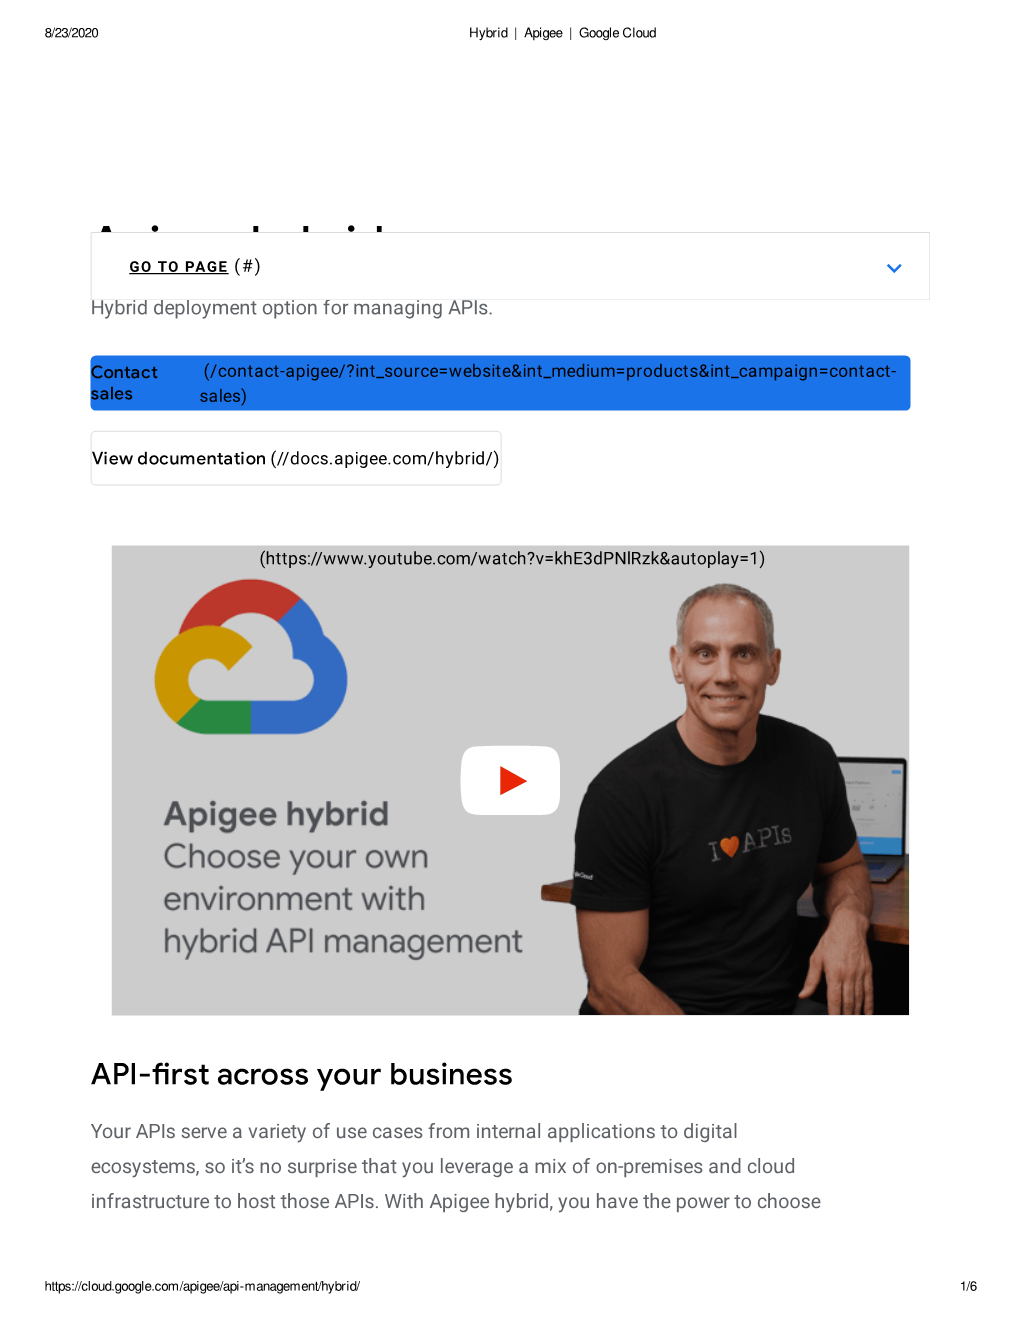 Apigee Hybrid GO to PAGE (#)  Hybrid Deployment Option for Managing Apis